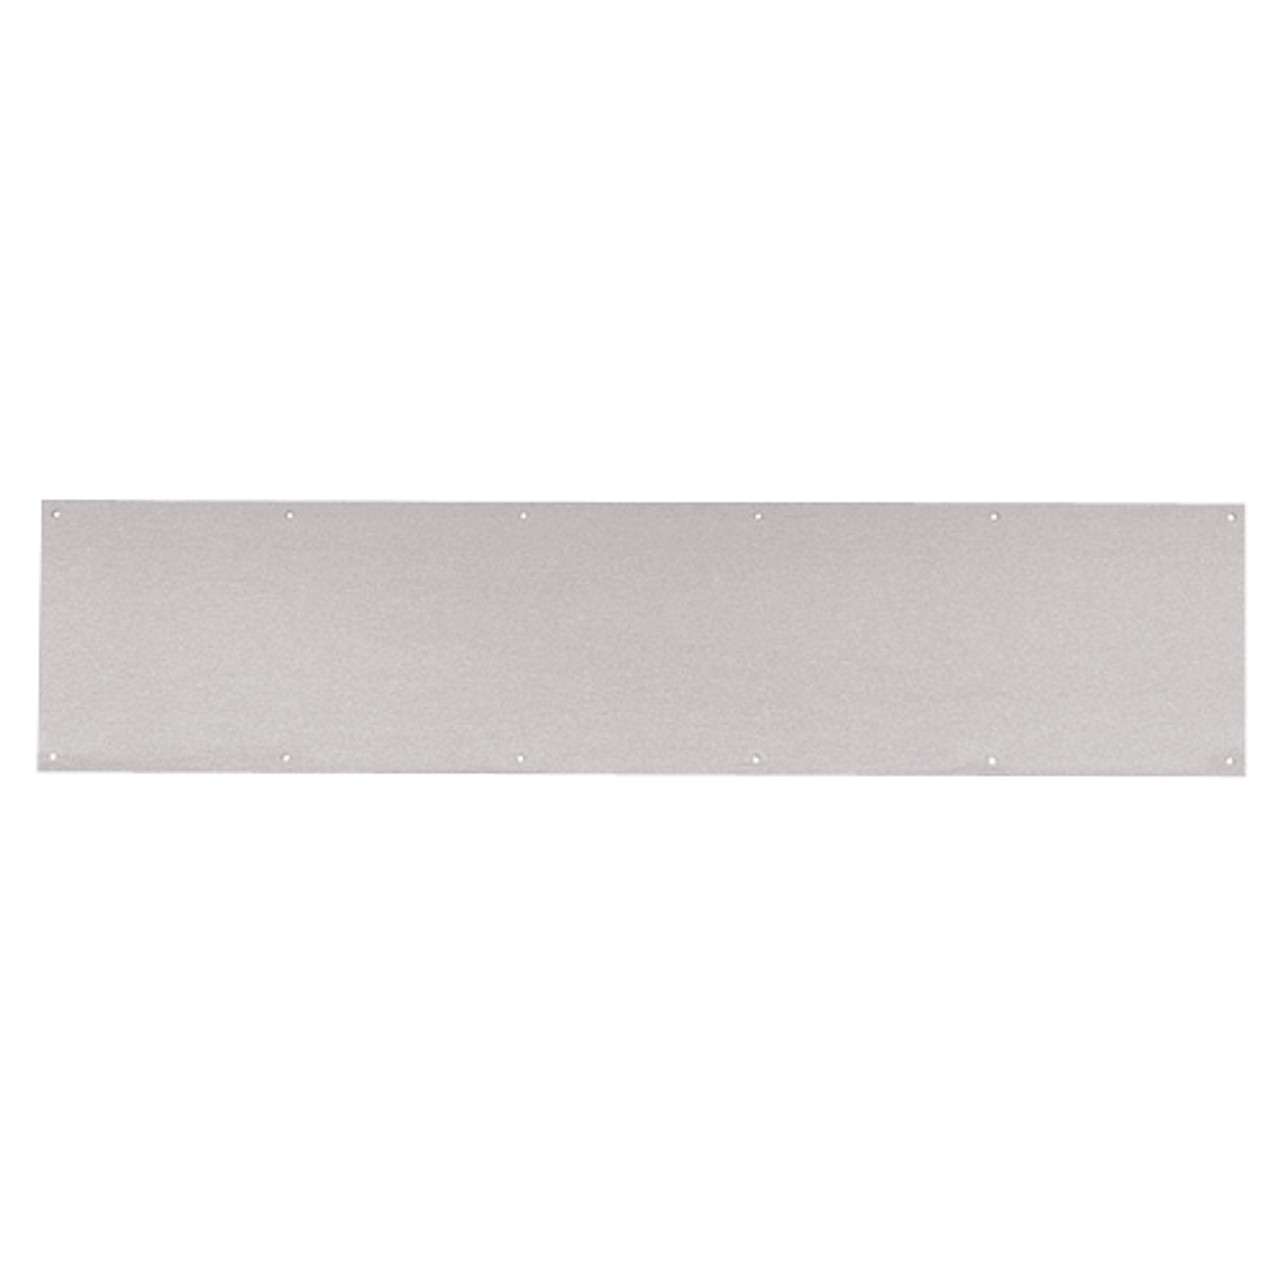 8400-US32D-10.5x34-B-CS Ives 8400 Series Protection Plate in Satin Stainless Steel